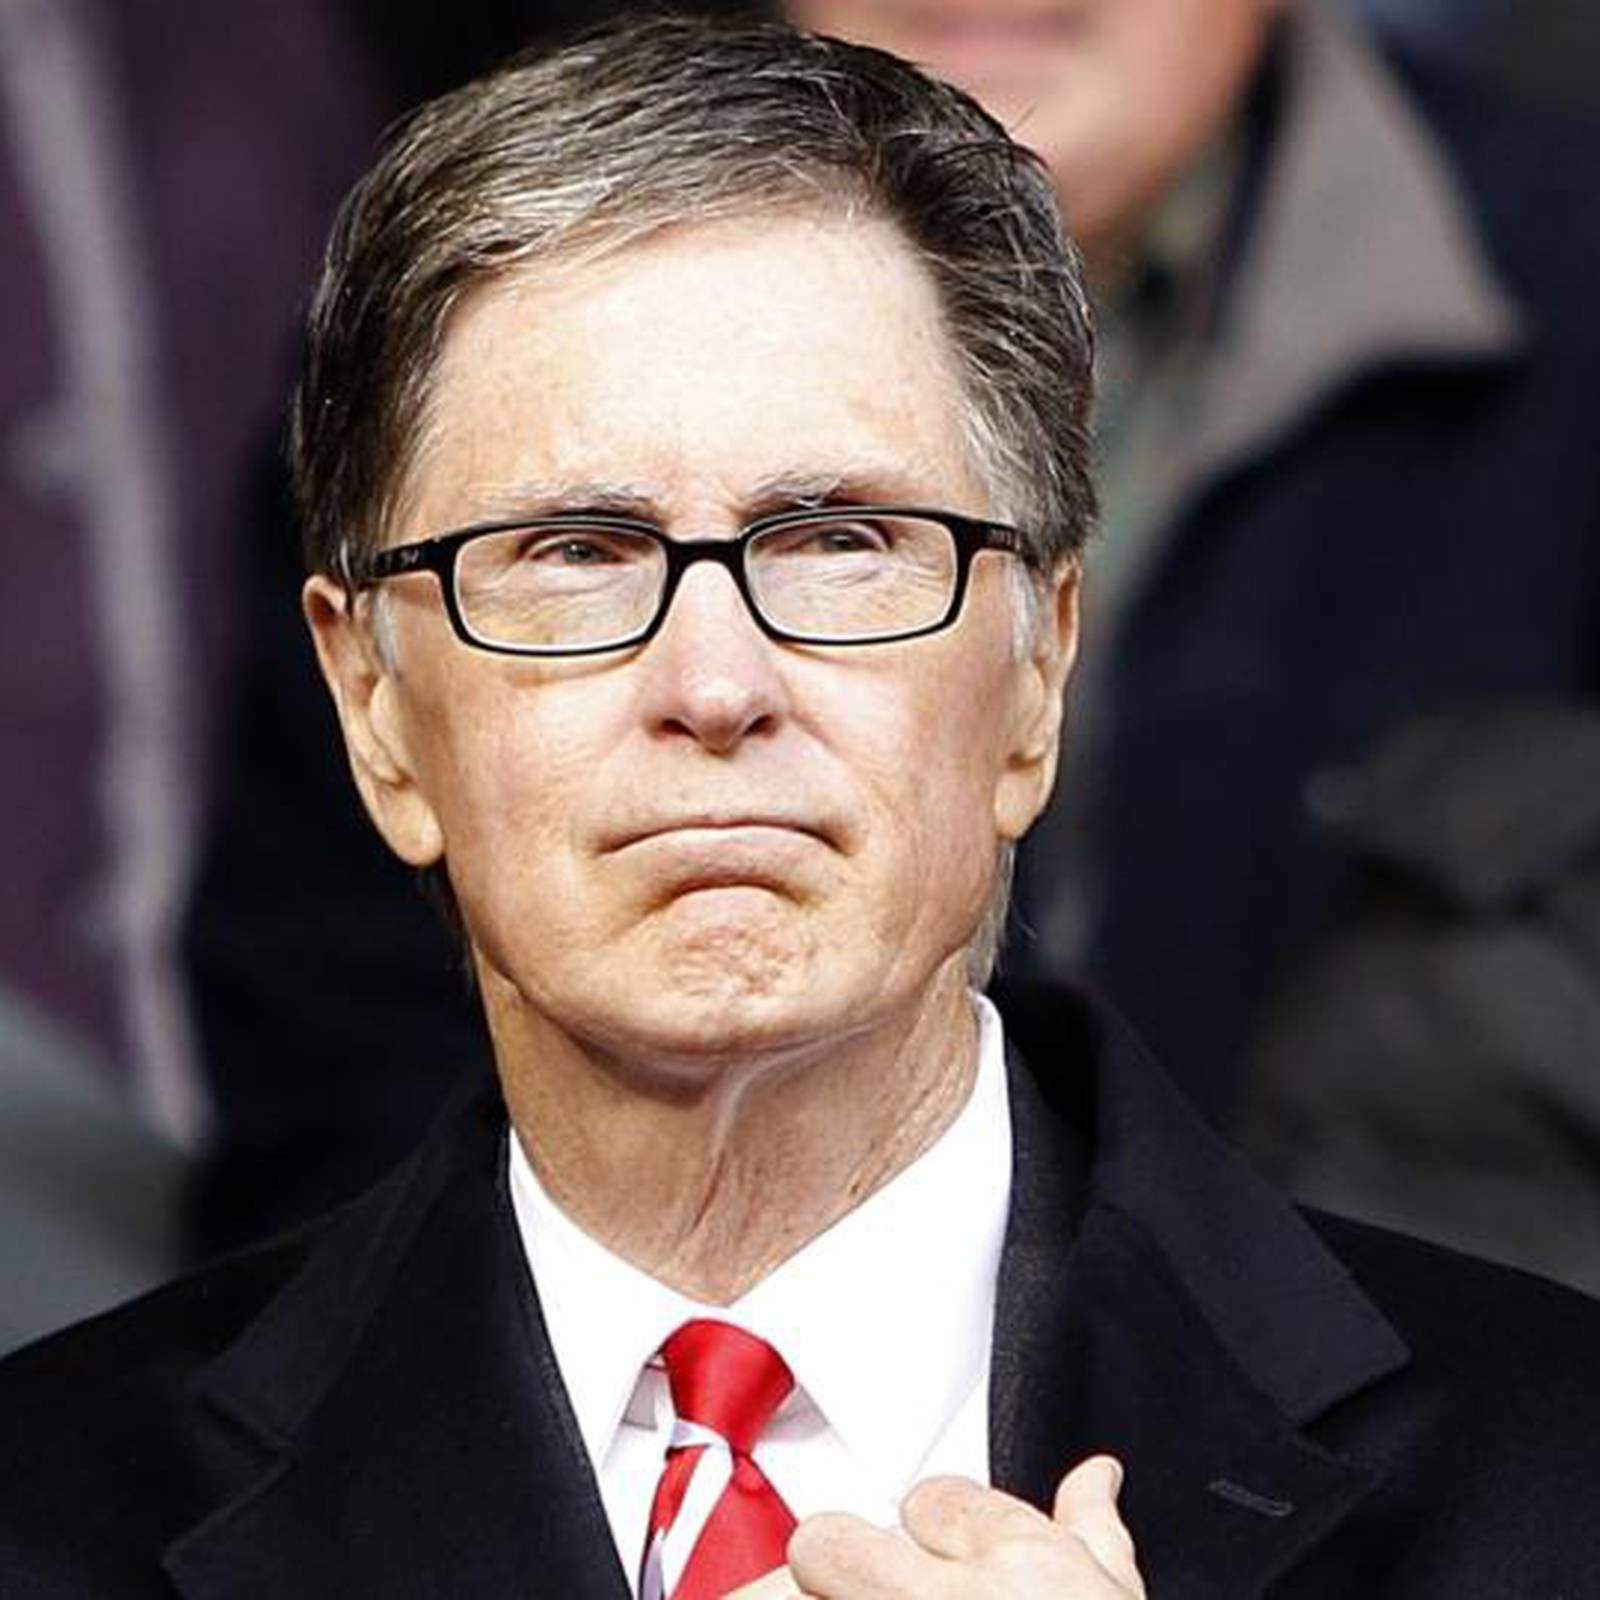 Liverpool owner John W Henry insists he remains fully committed to the club